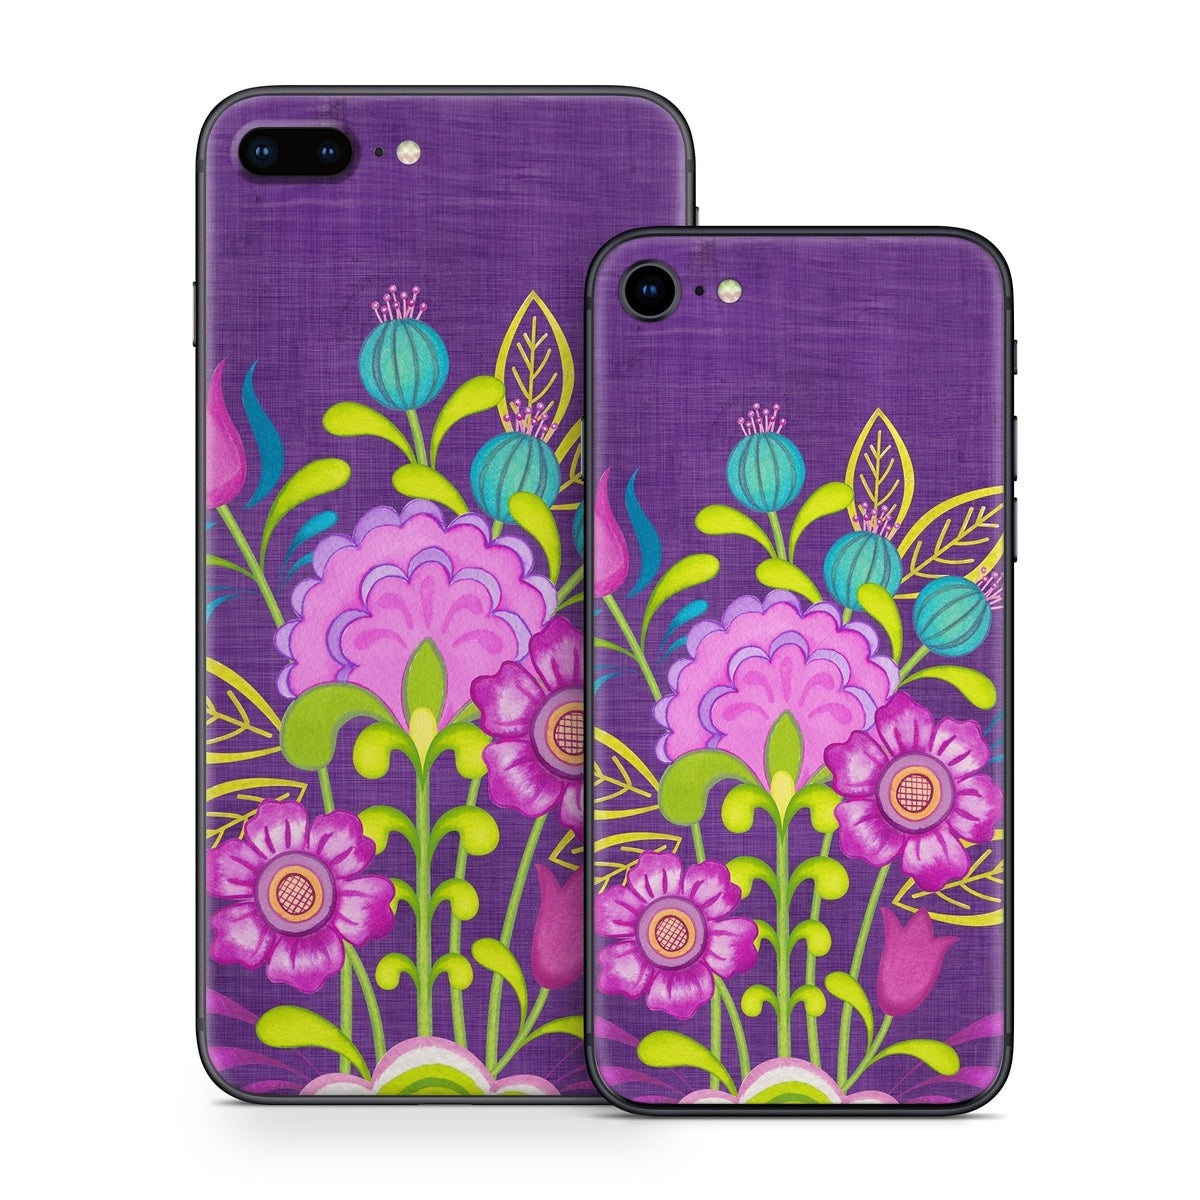 Floral Bouquet - Apple iPhone 8 Skin